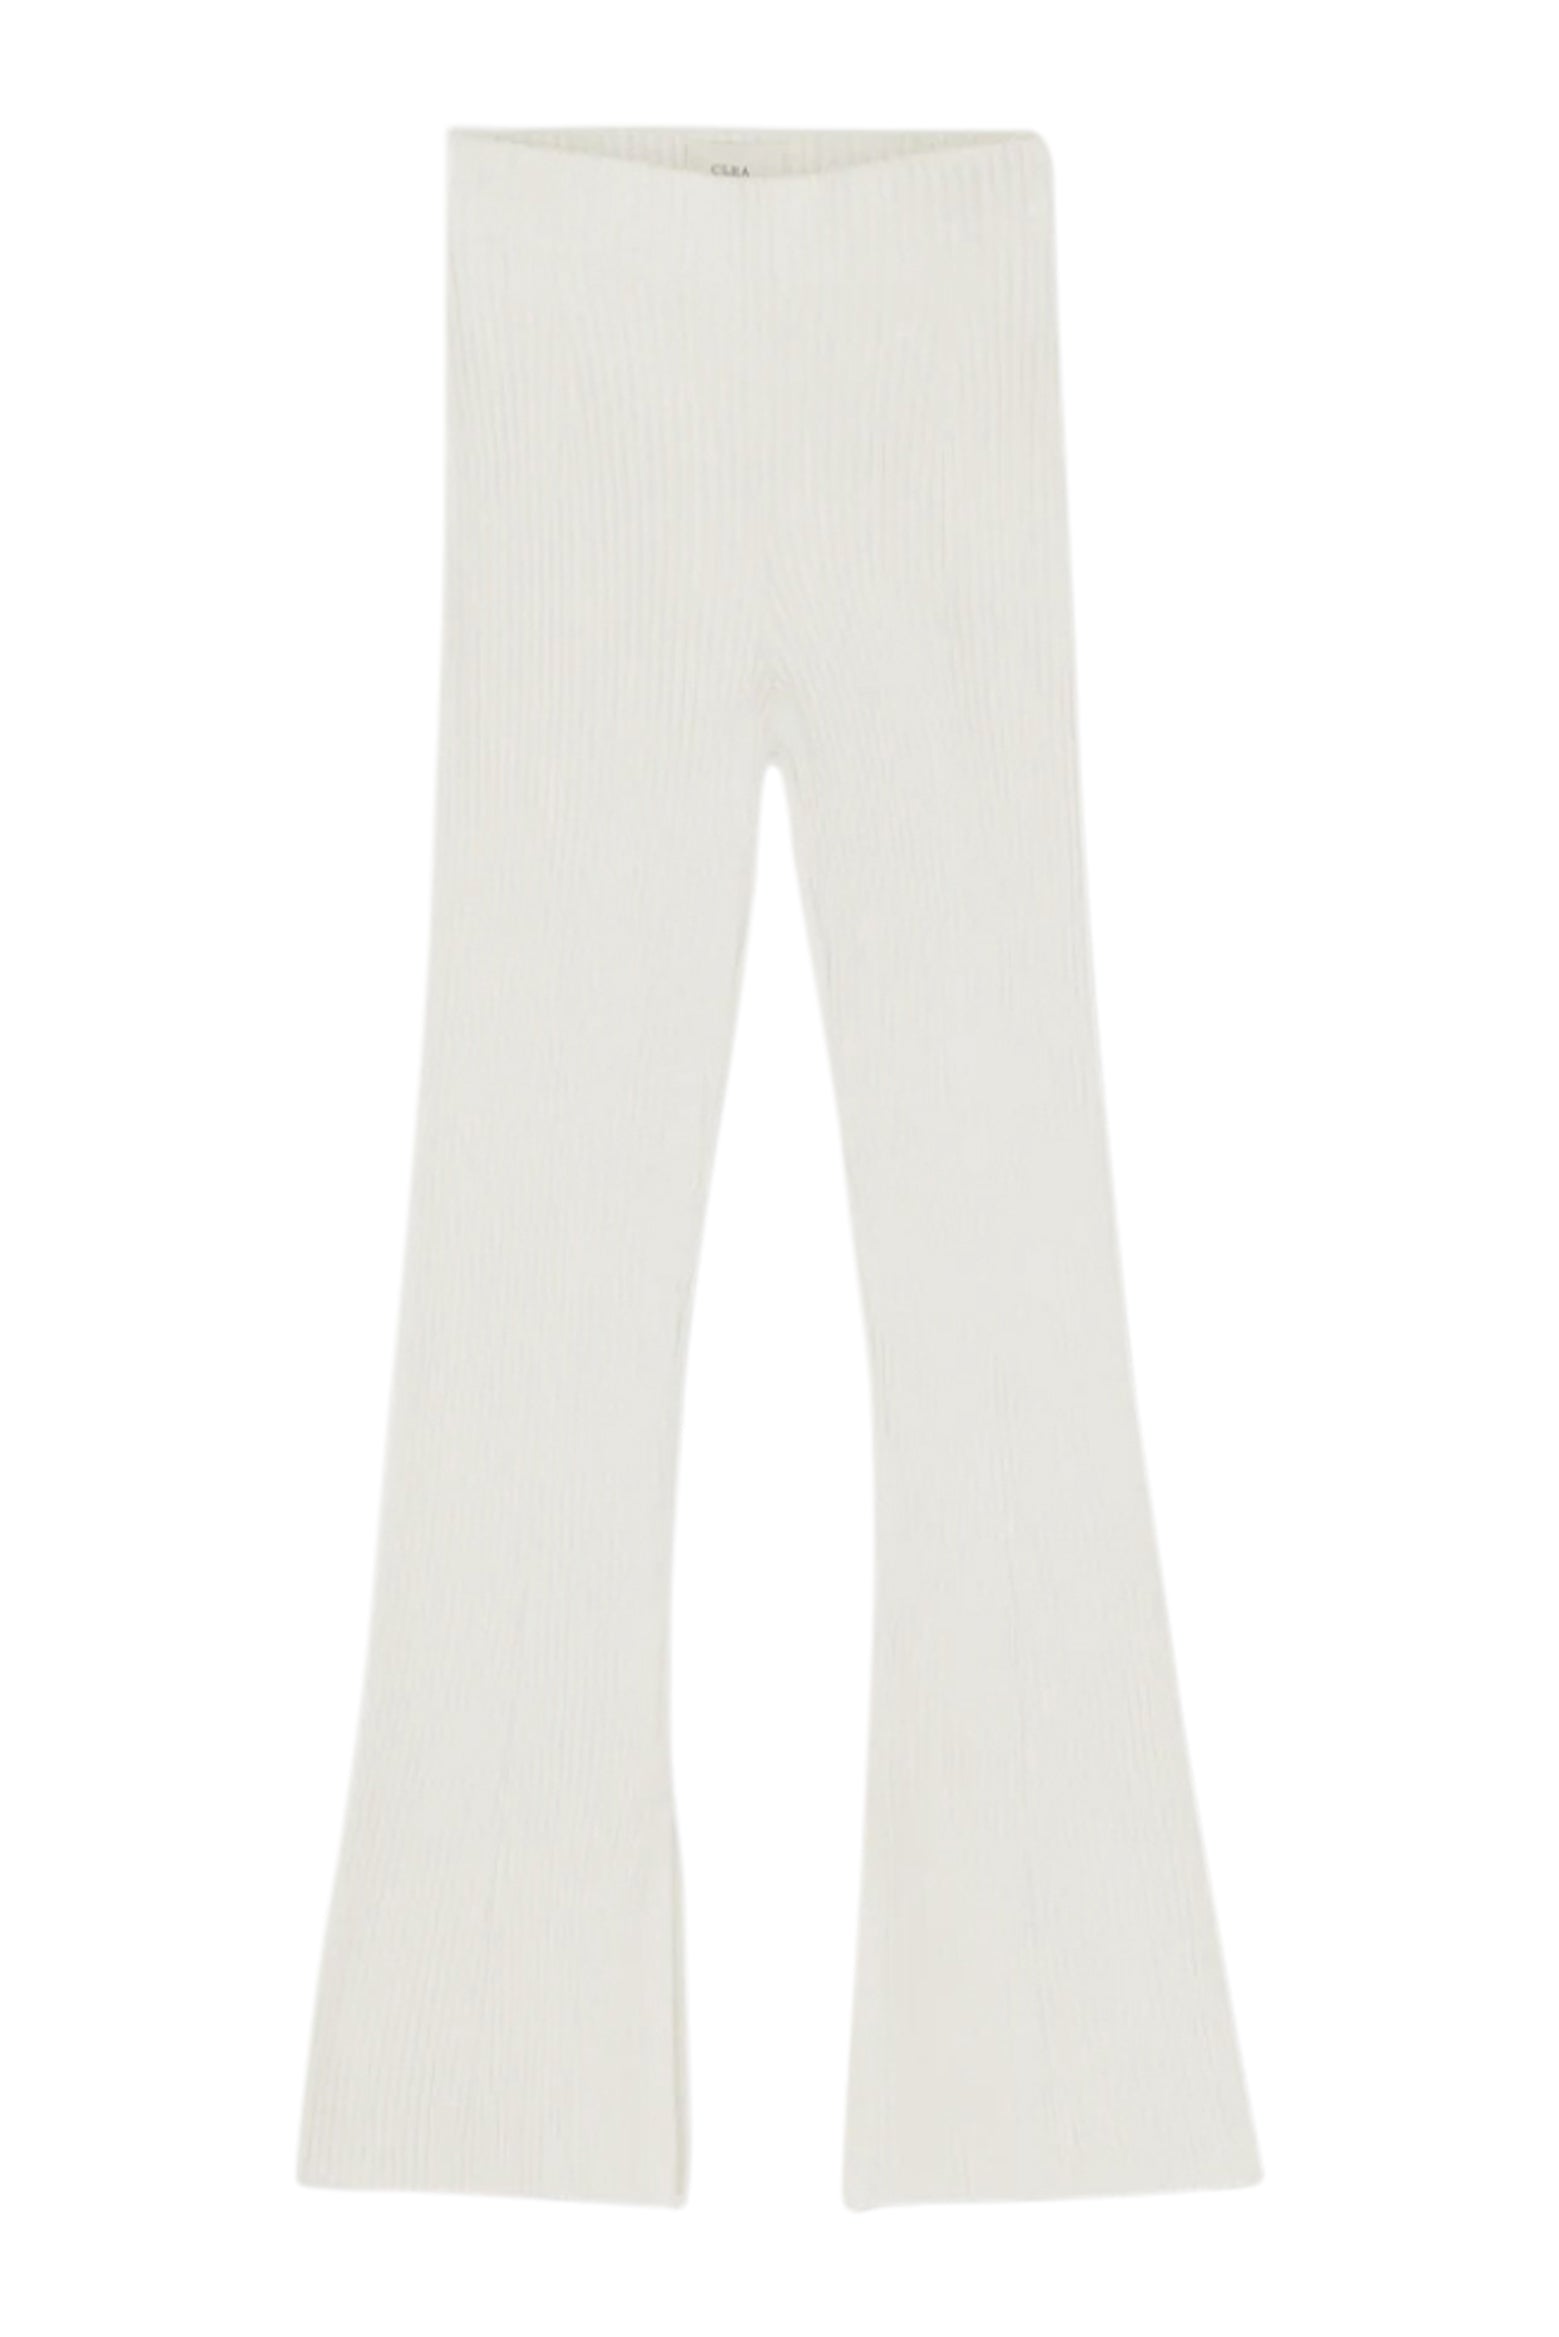 CLEA Kaite Rib Knit Pant in Chalk | TNT The New Trend